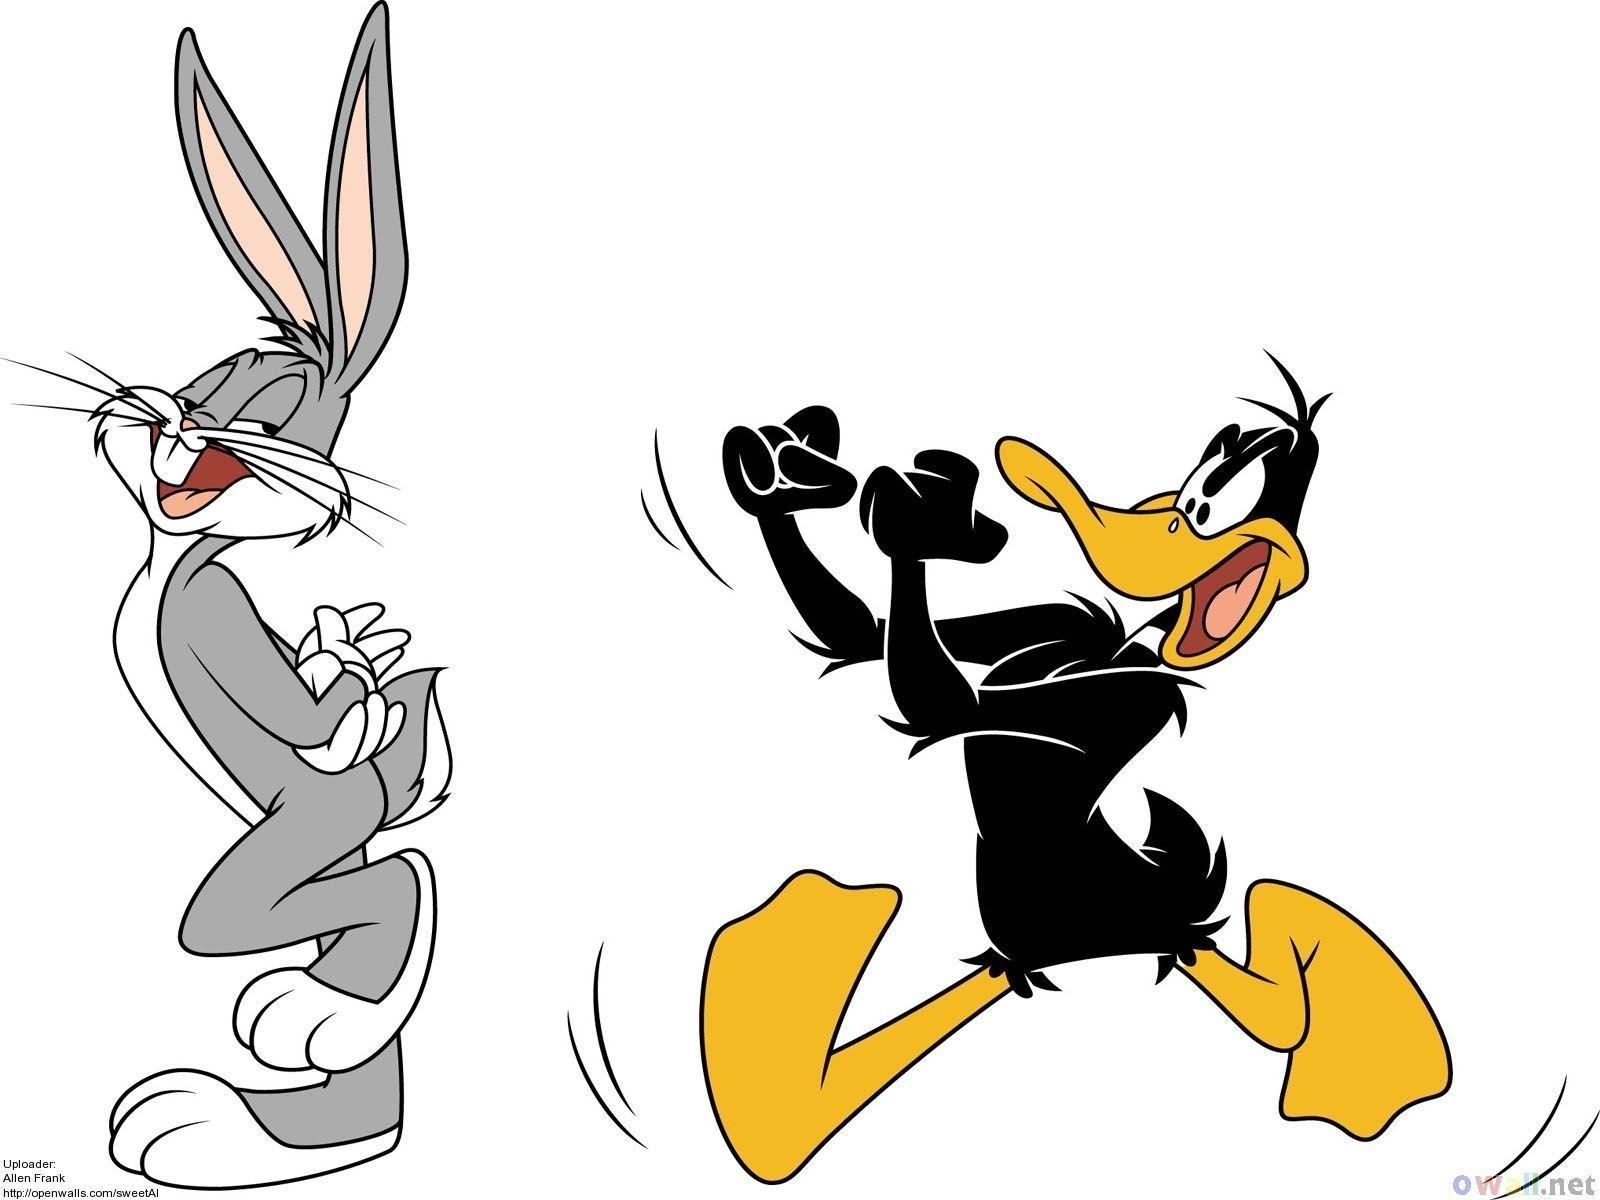 Bugs Bunny and Daffy Duck Wallpaper Download Free